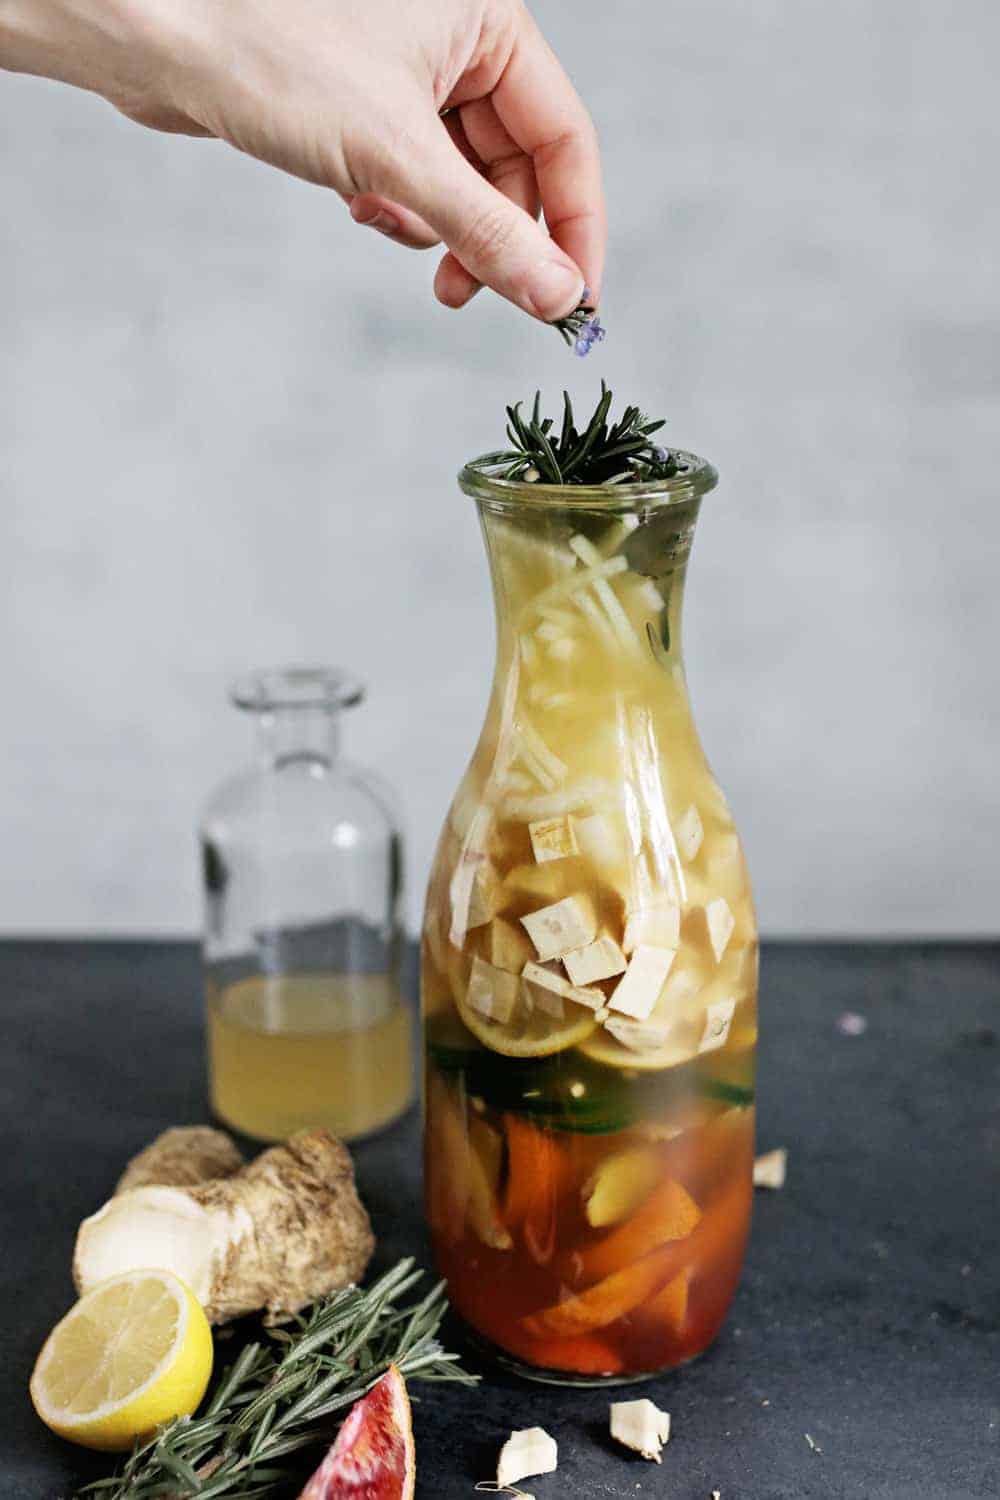 How to Make Healing Fire Cider | Hello Glow